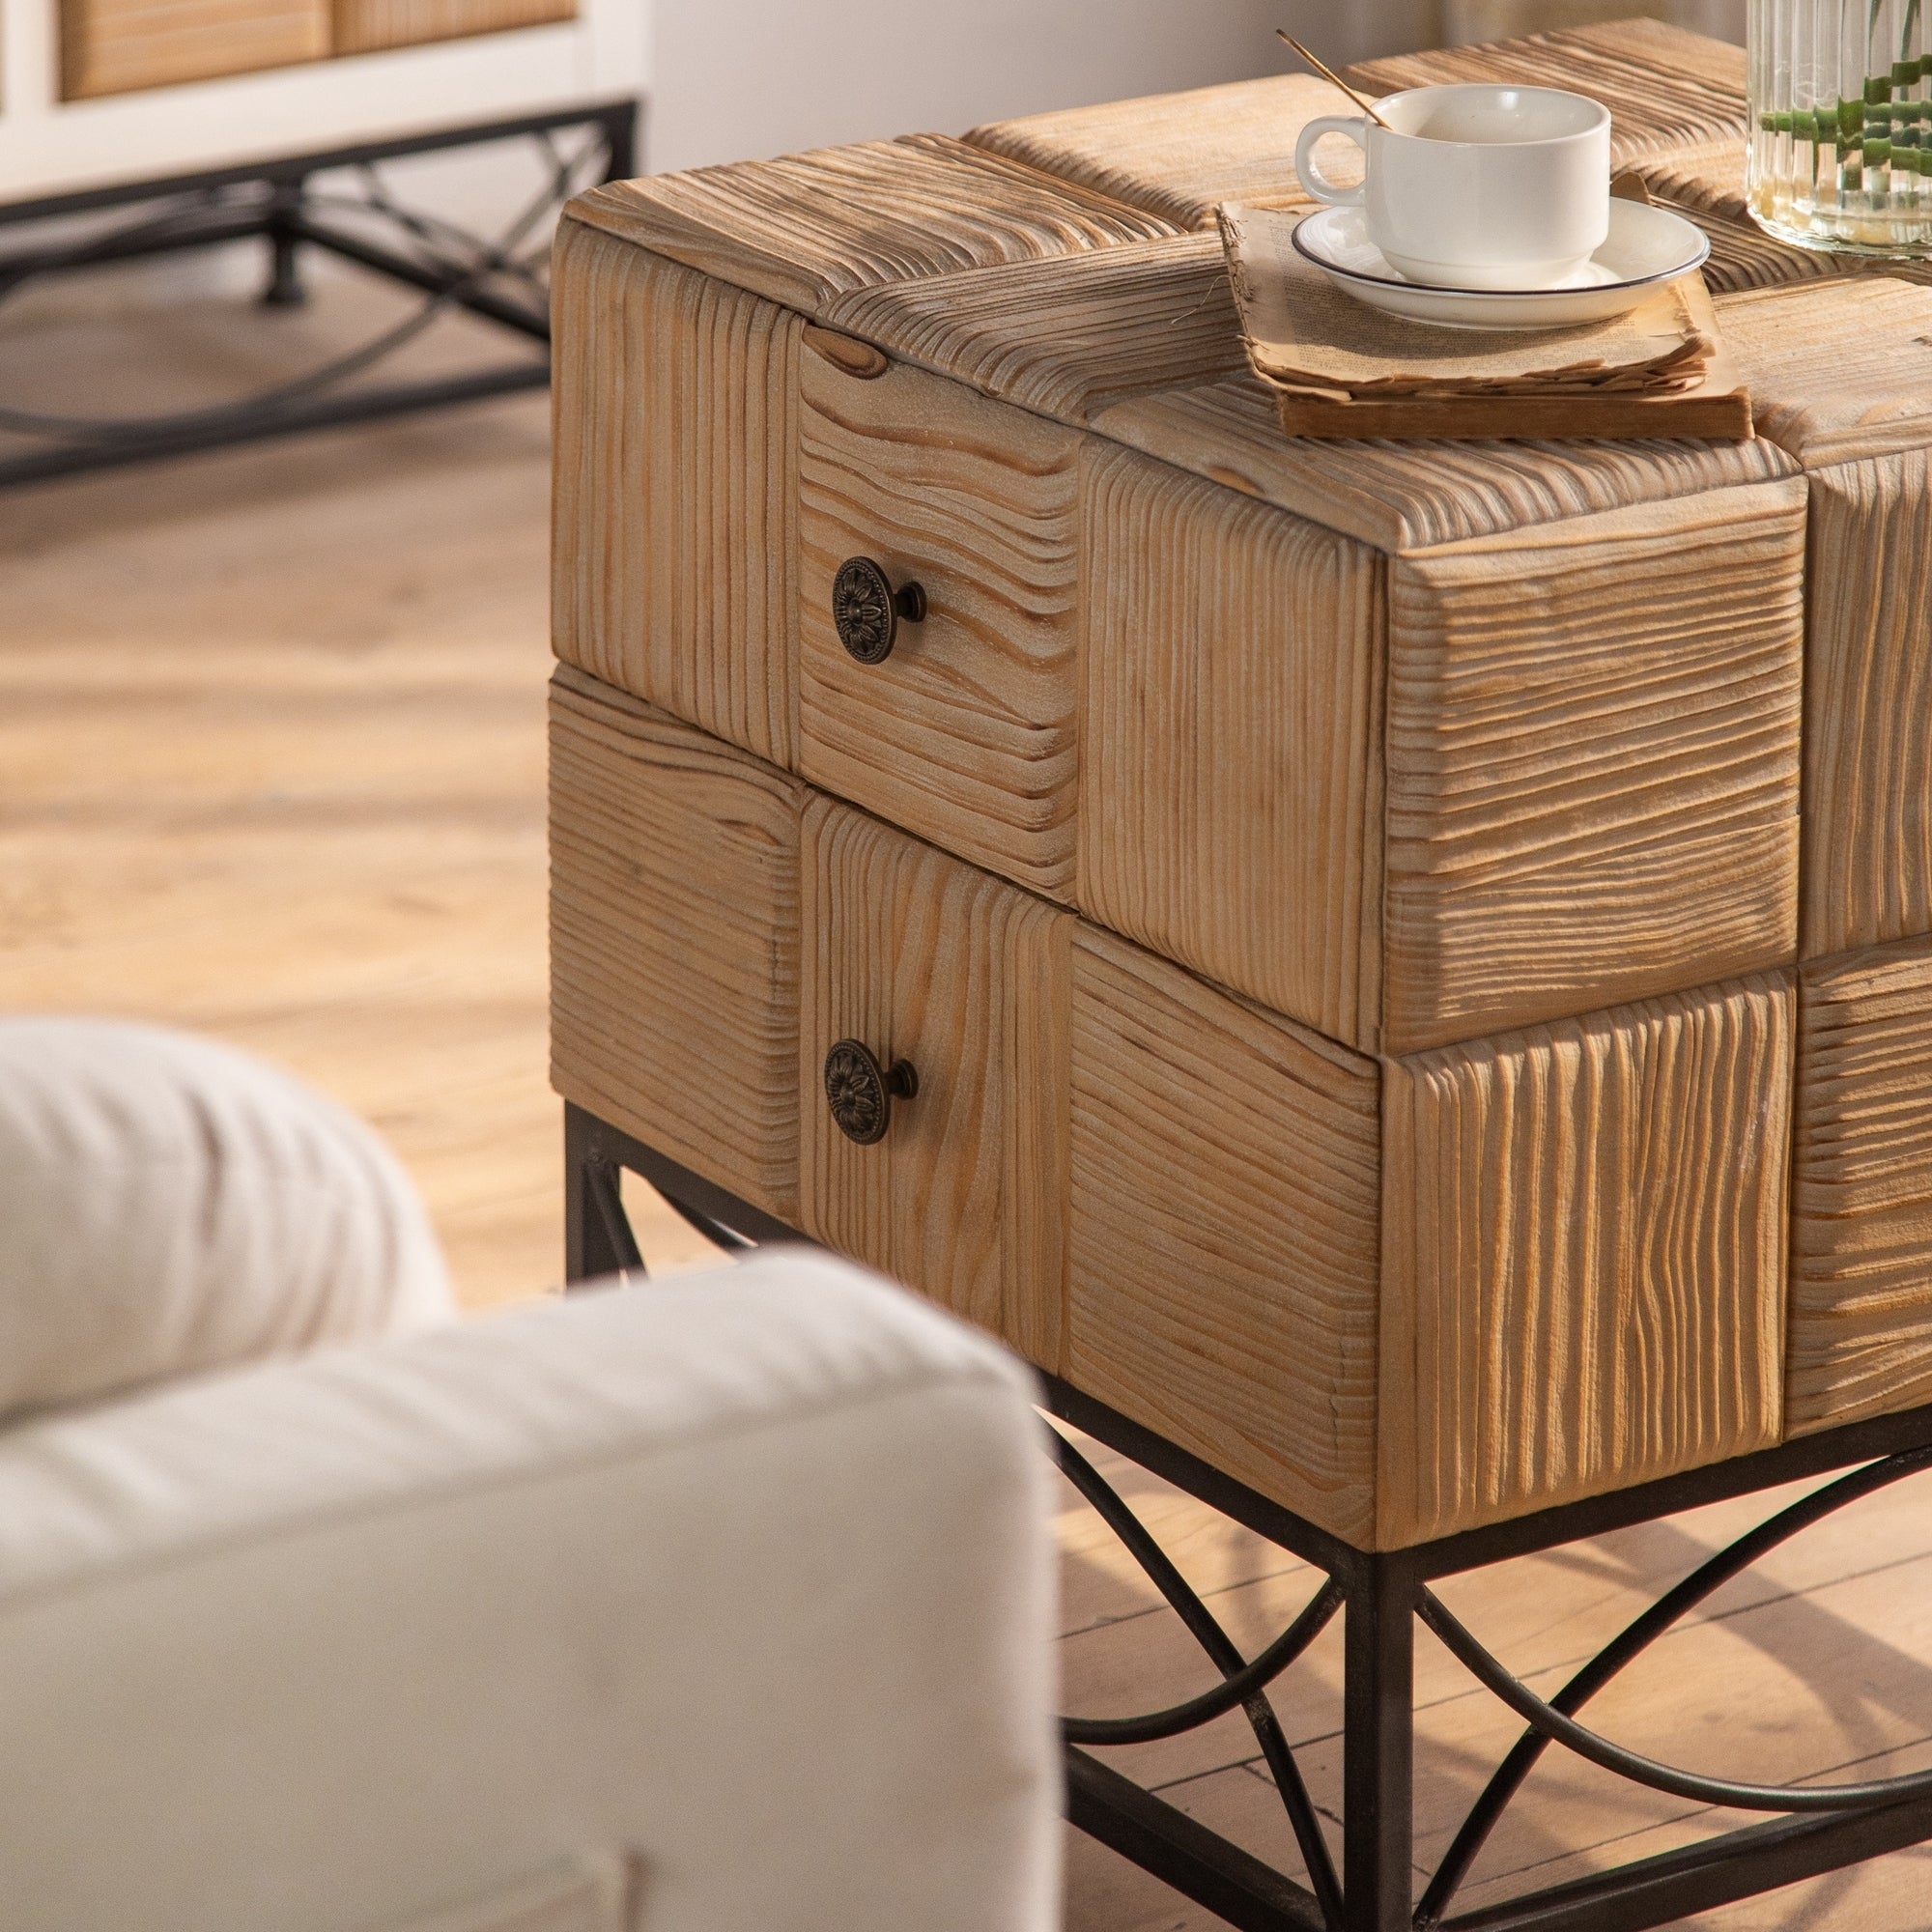 Small Grid Splicing Design Retro Square Coffee Table with 2 Drawers - Natural